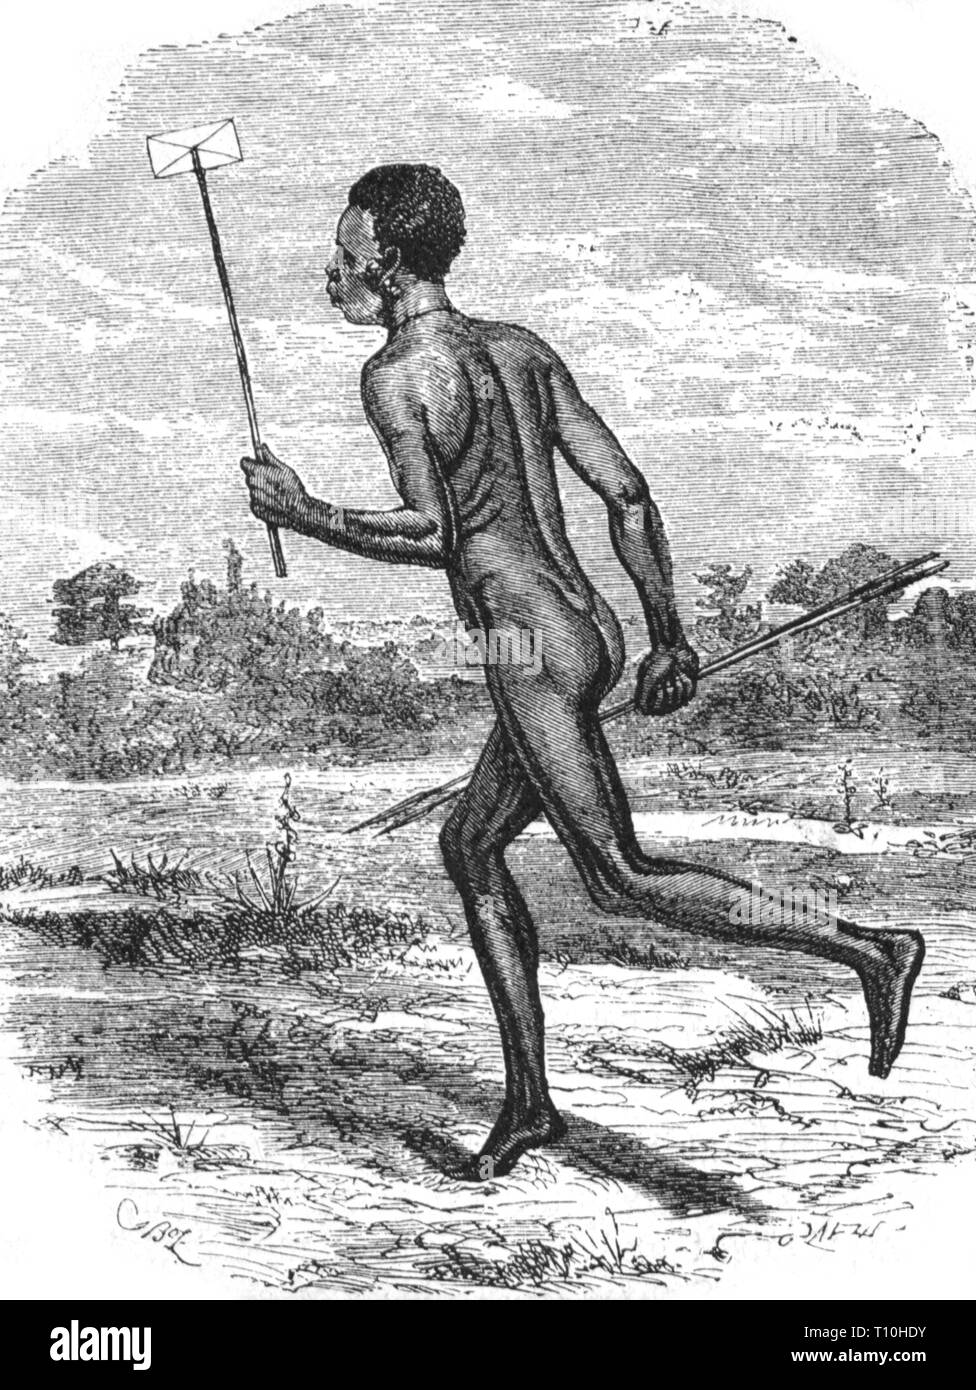 mail, postmen, running courier at the Loango Coast, congo, wood engraving, 2nd half 19th century, letter, letters, spear, spears, pole, poles, mail runner, Kingdom of Loango, Africa, people, man, men, Black African, Africans, Bakongo, Bantu, mail, post, postmen, mailmen, postman, mailman, messenger, intelligencer, couriers, messengers, intelligencers, by courier, historic, historical, Artist's Copyright has not to be cleared Stock Photo